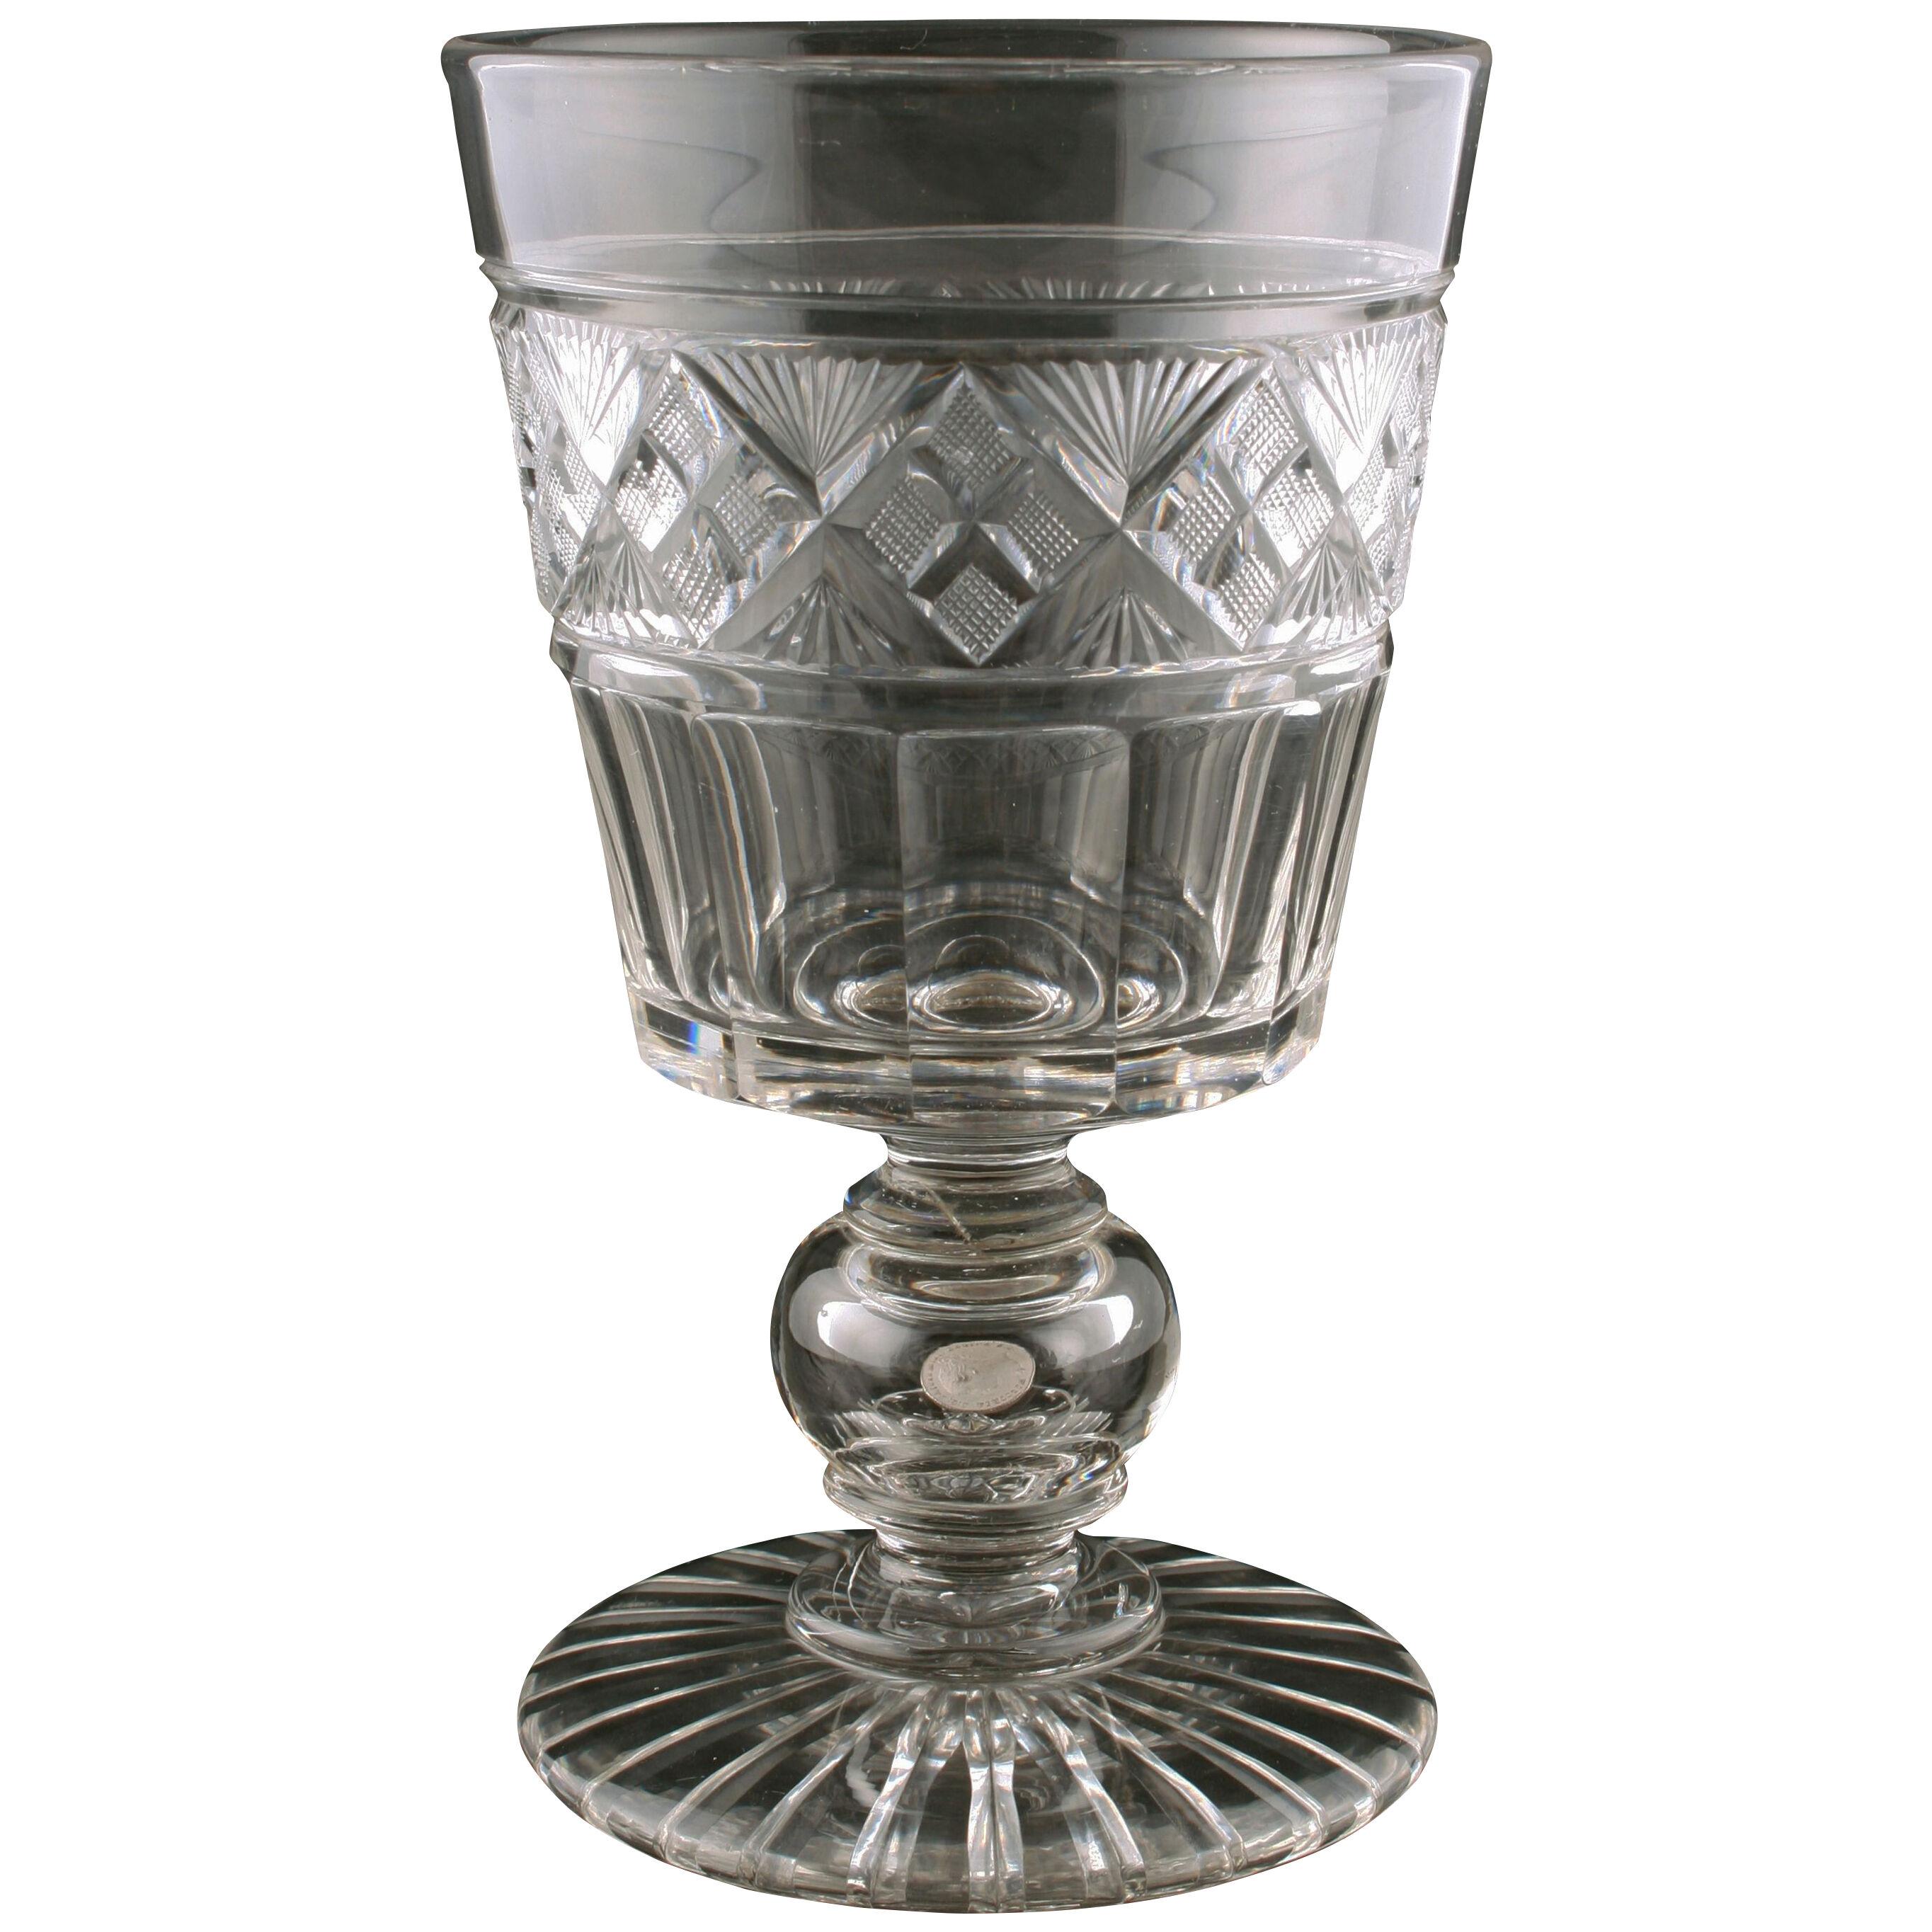 Large Victorian Coin Goblet